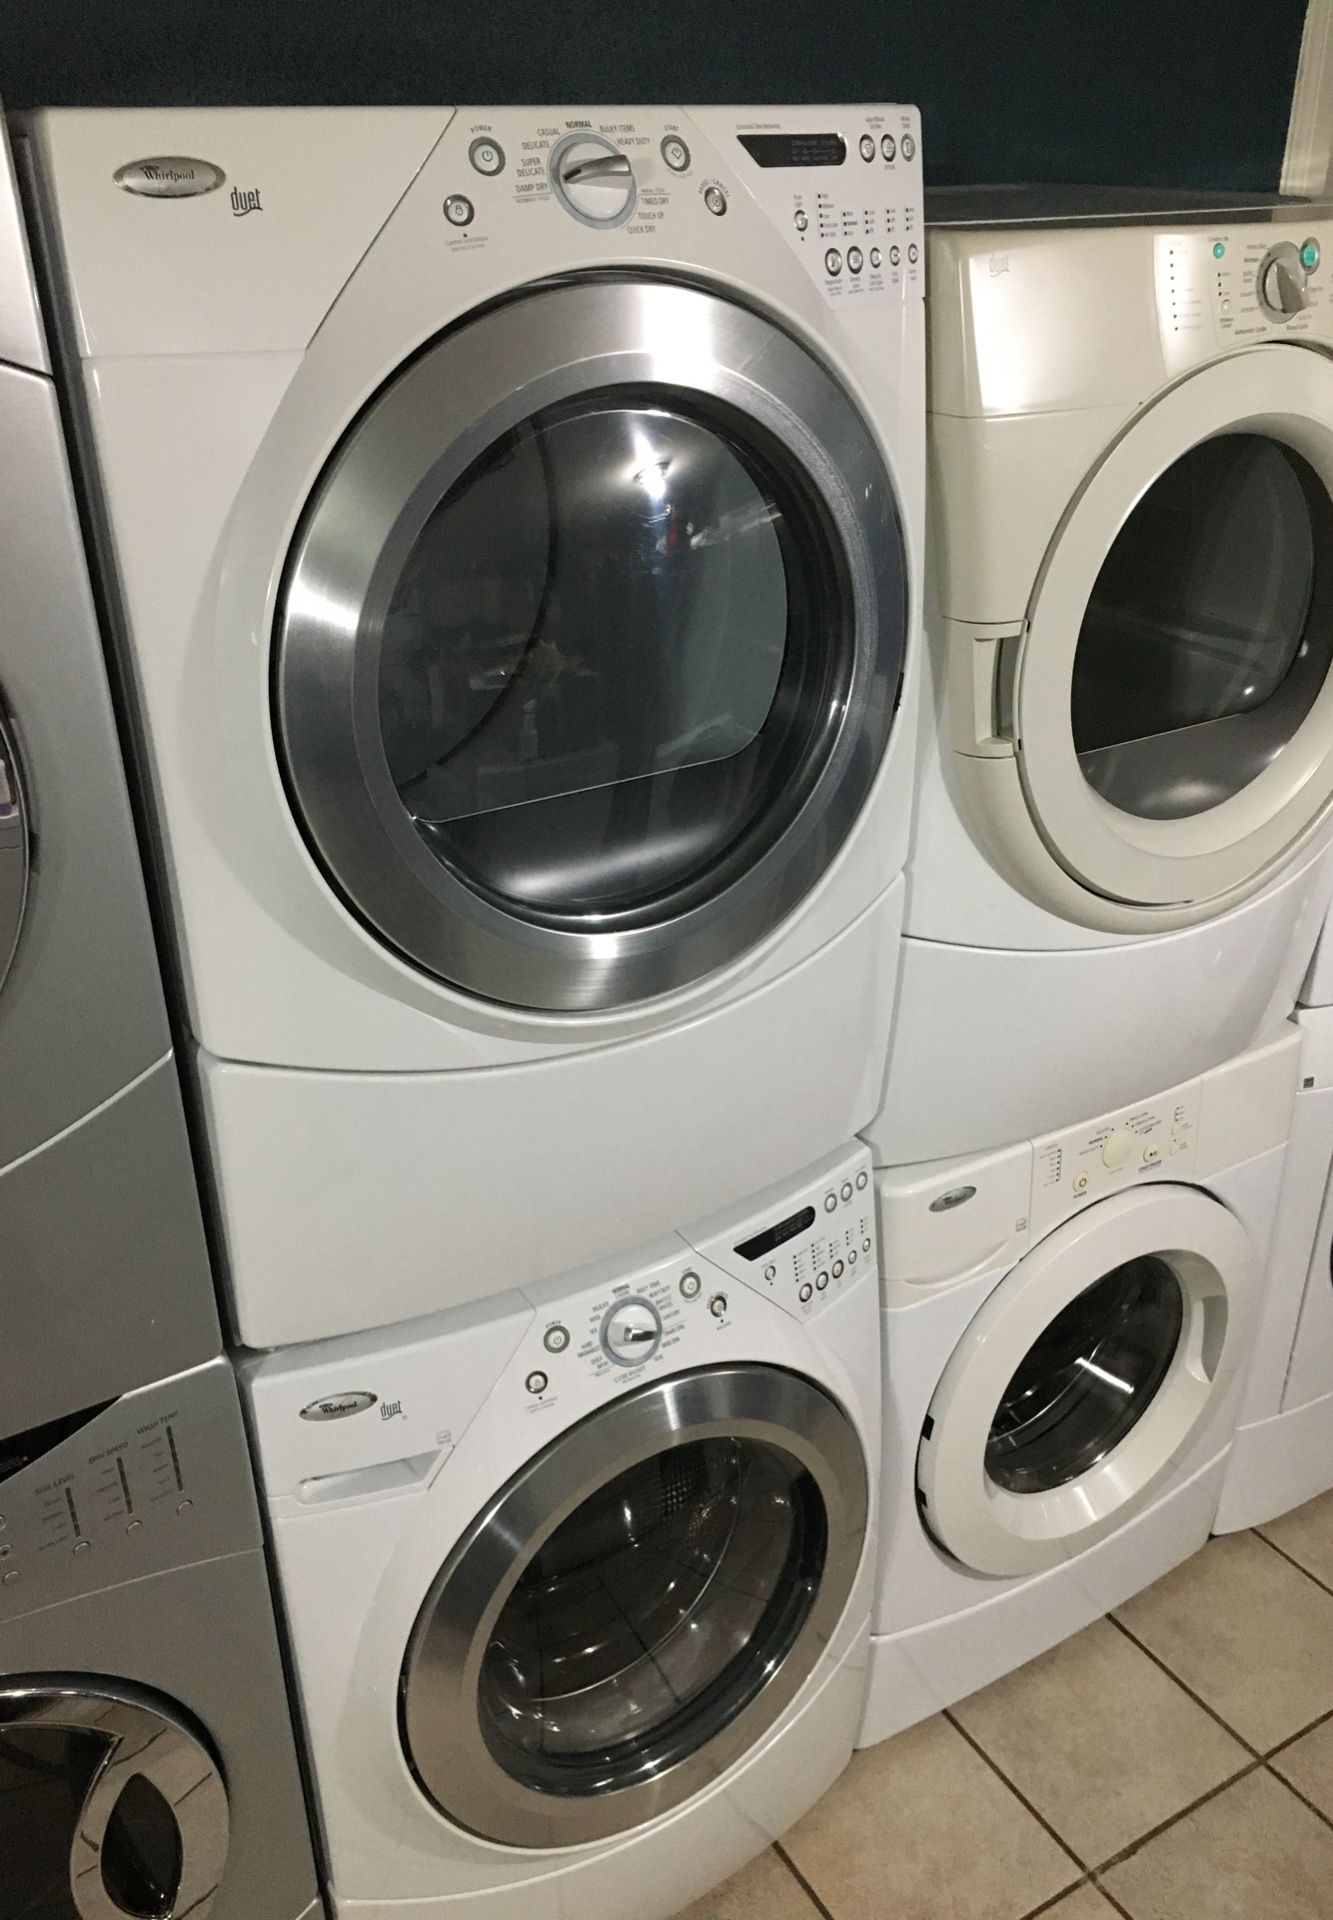 Whirlpool washer and Dryer